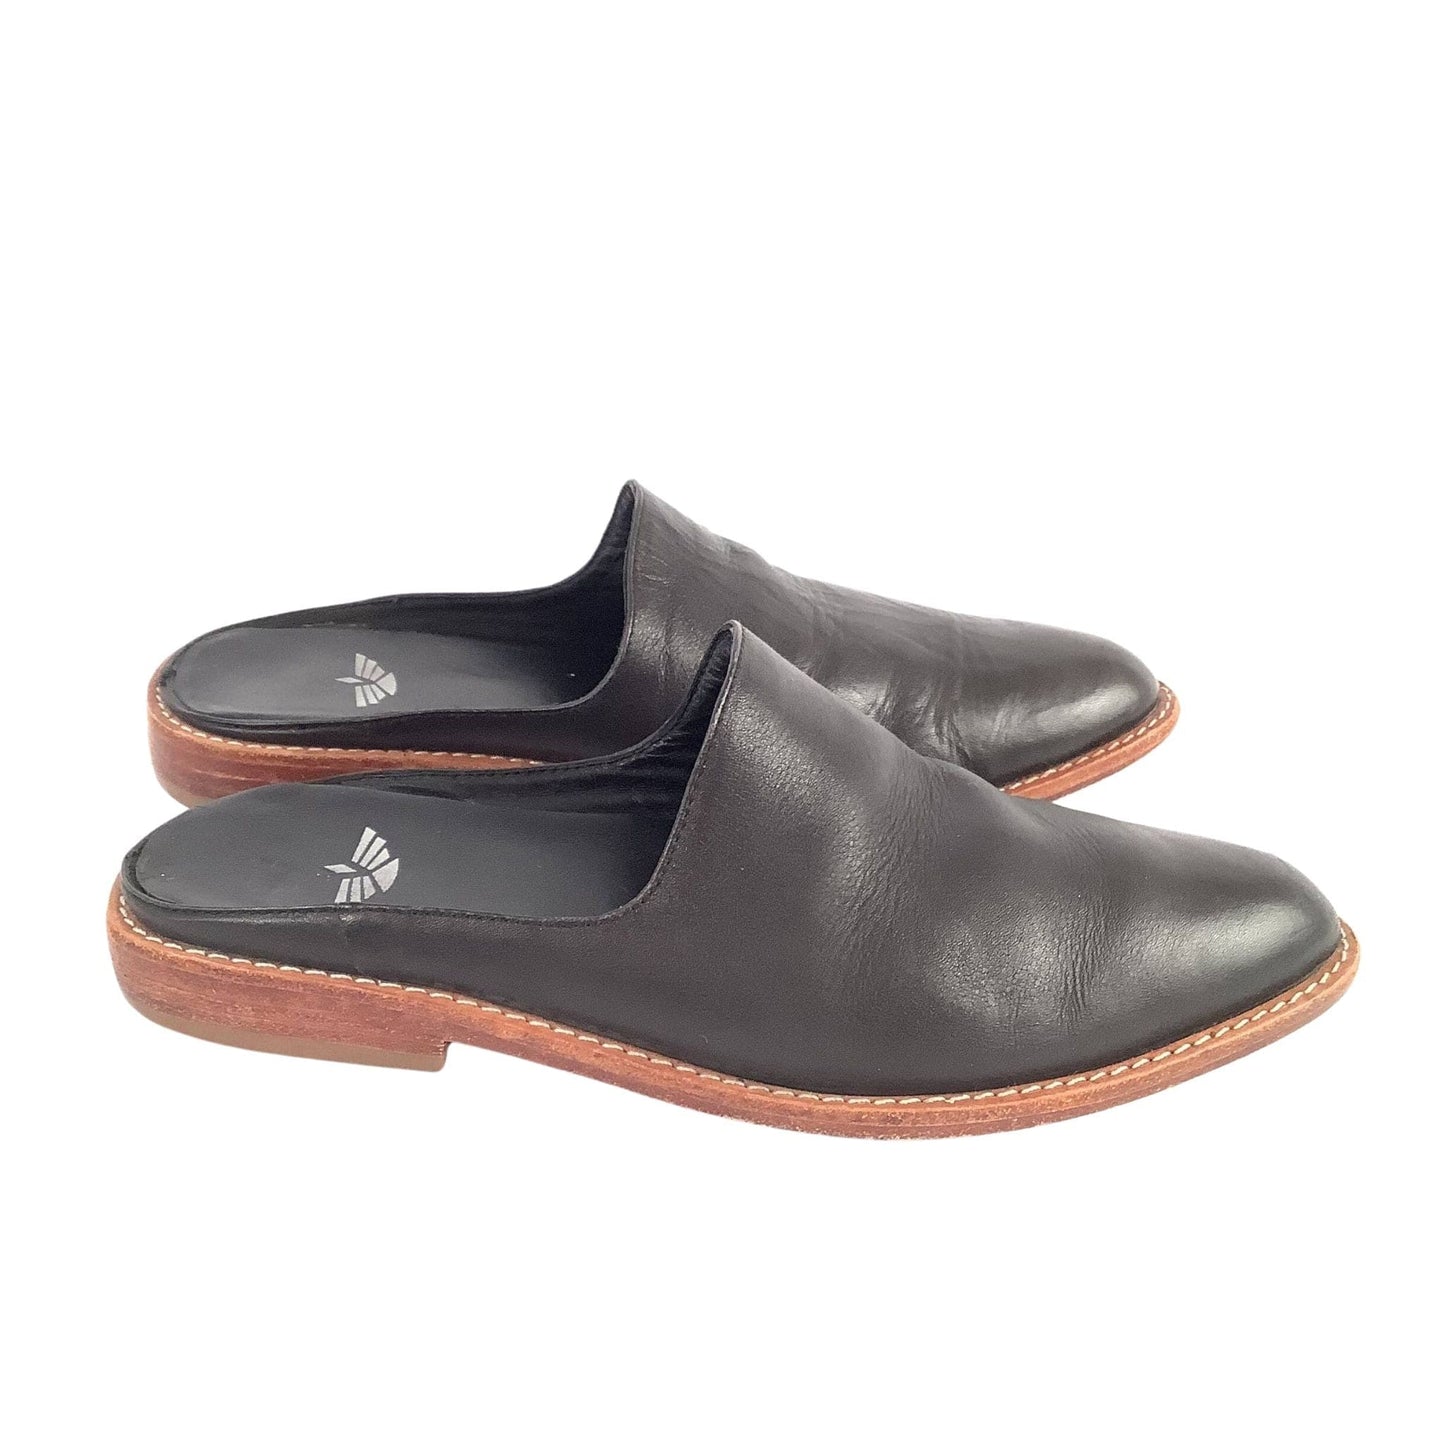 Fortress of Inca Flat Mules 7 / Black / Y2K - Now